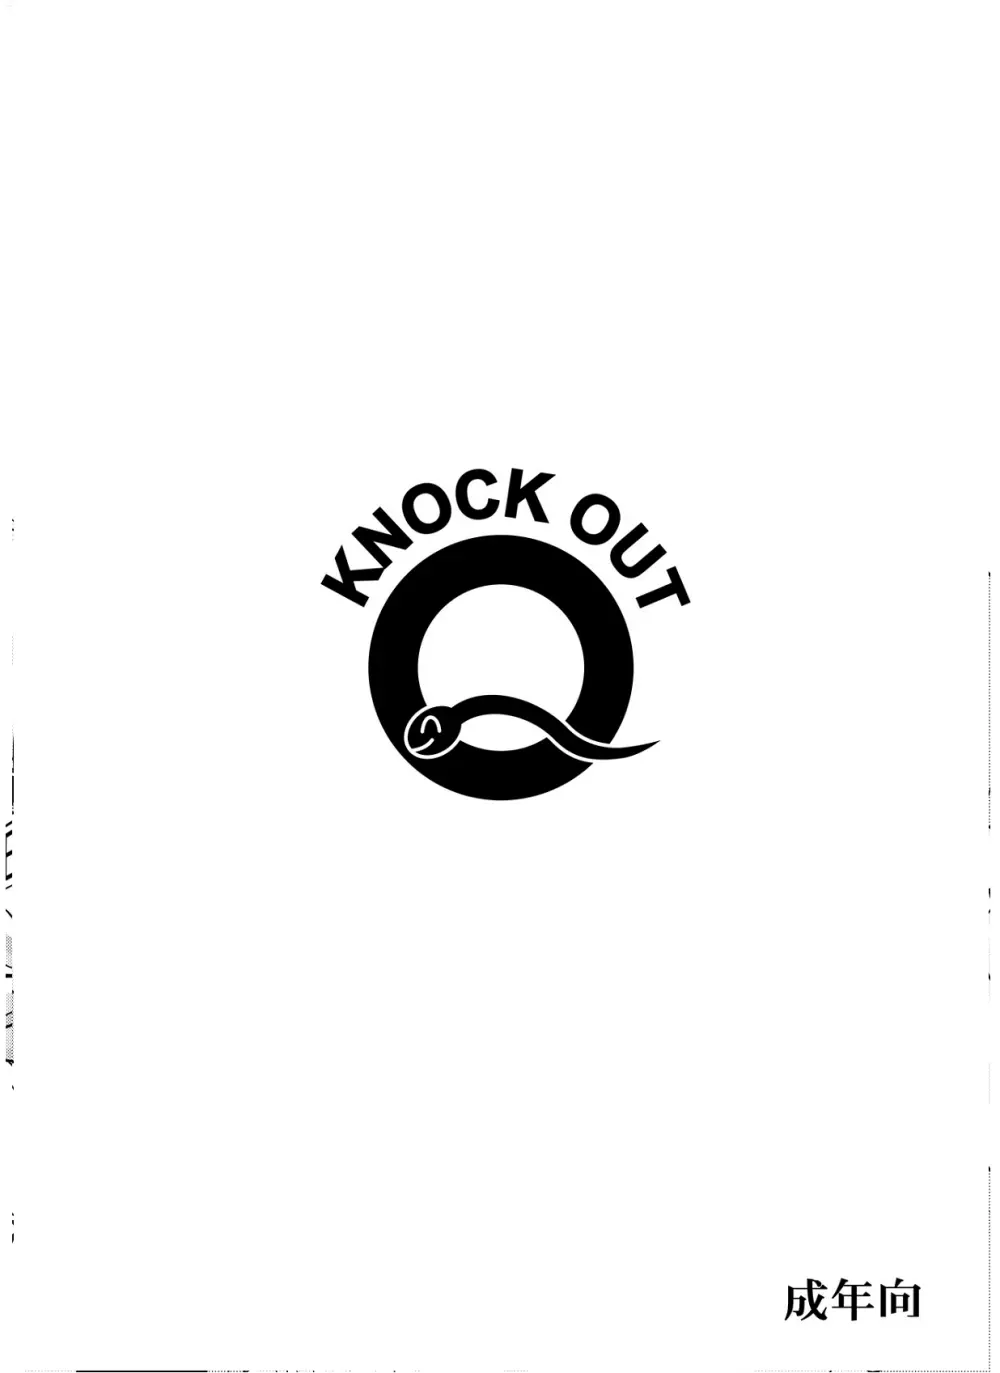 Knockout-Q 12ページ